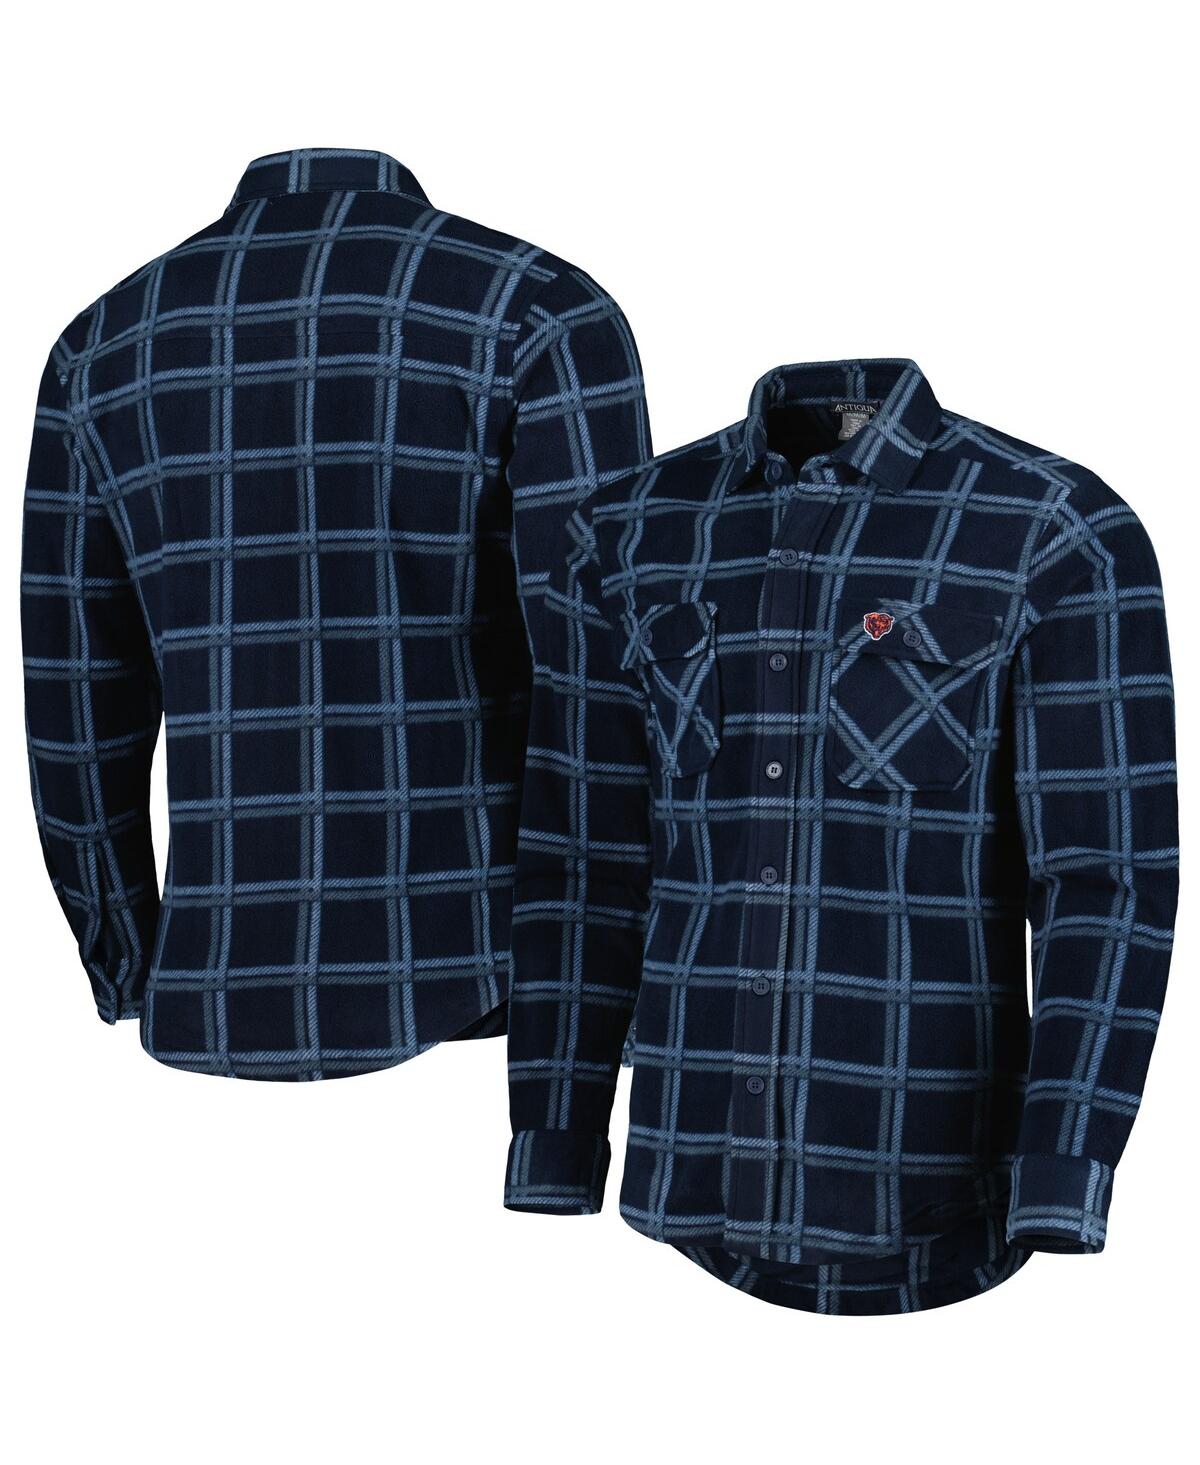 Men's Antigua Navy Chicago Bears Industry Flannel Button-Up Shirt Jacket - Navy